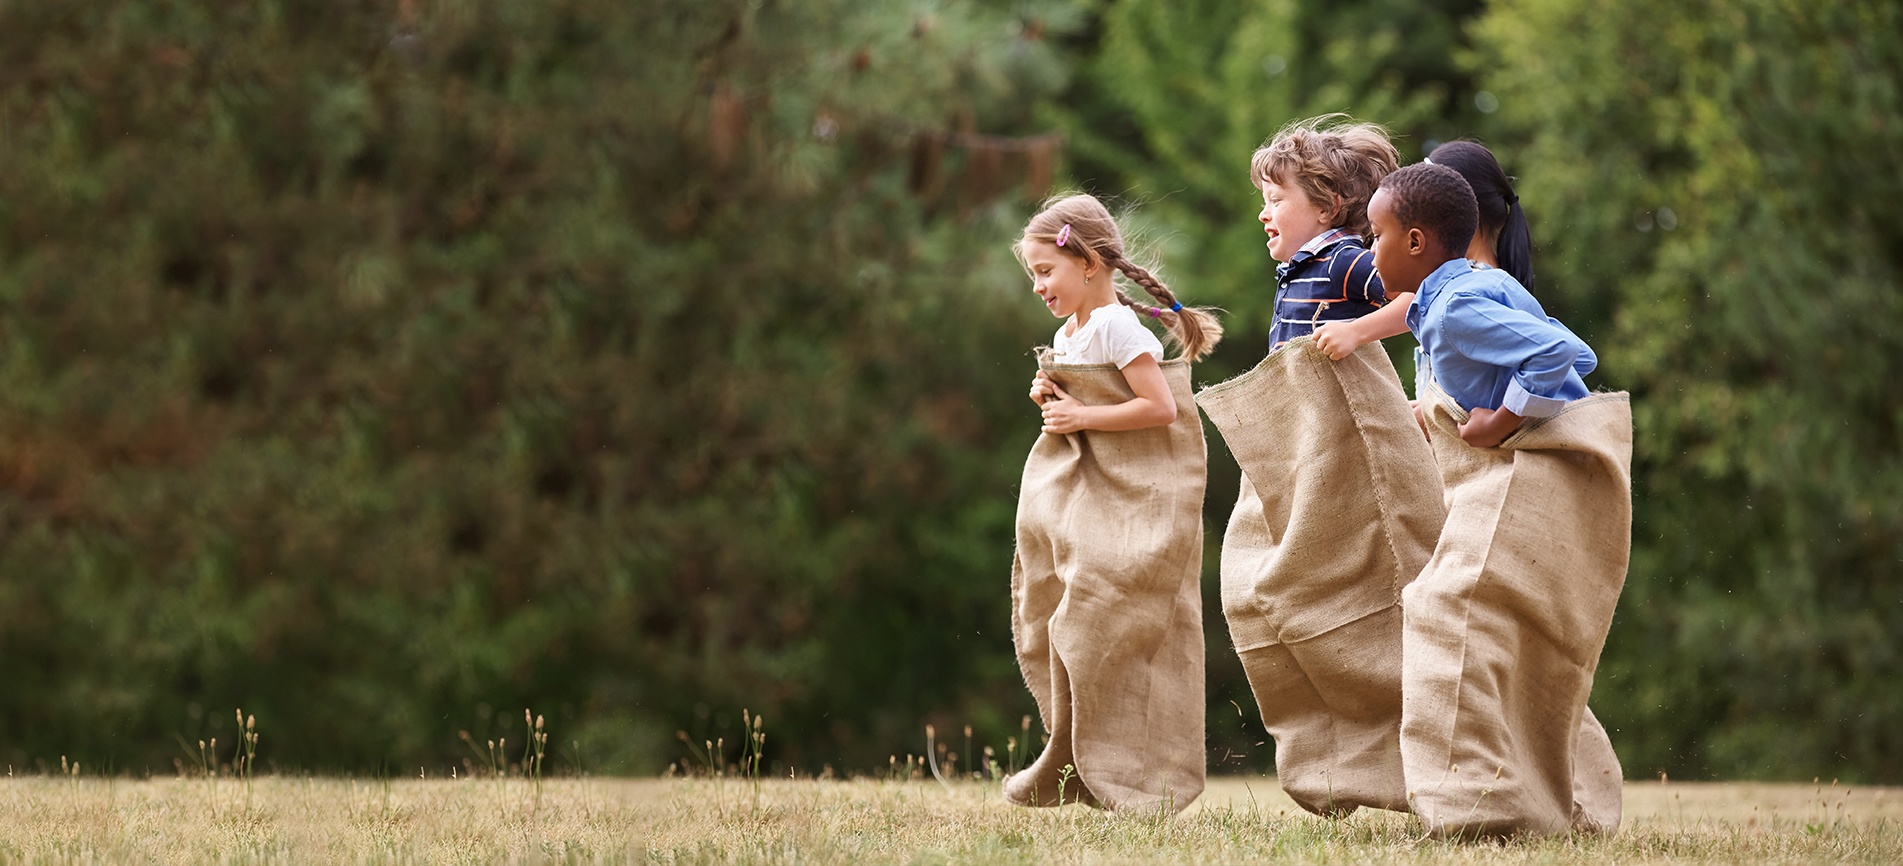 Young children in sacks prepare to run a race in a lush green park on a sunny day